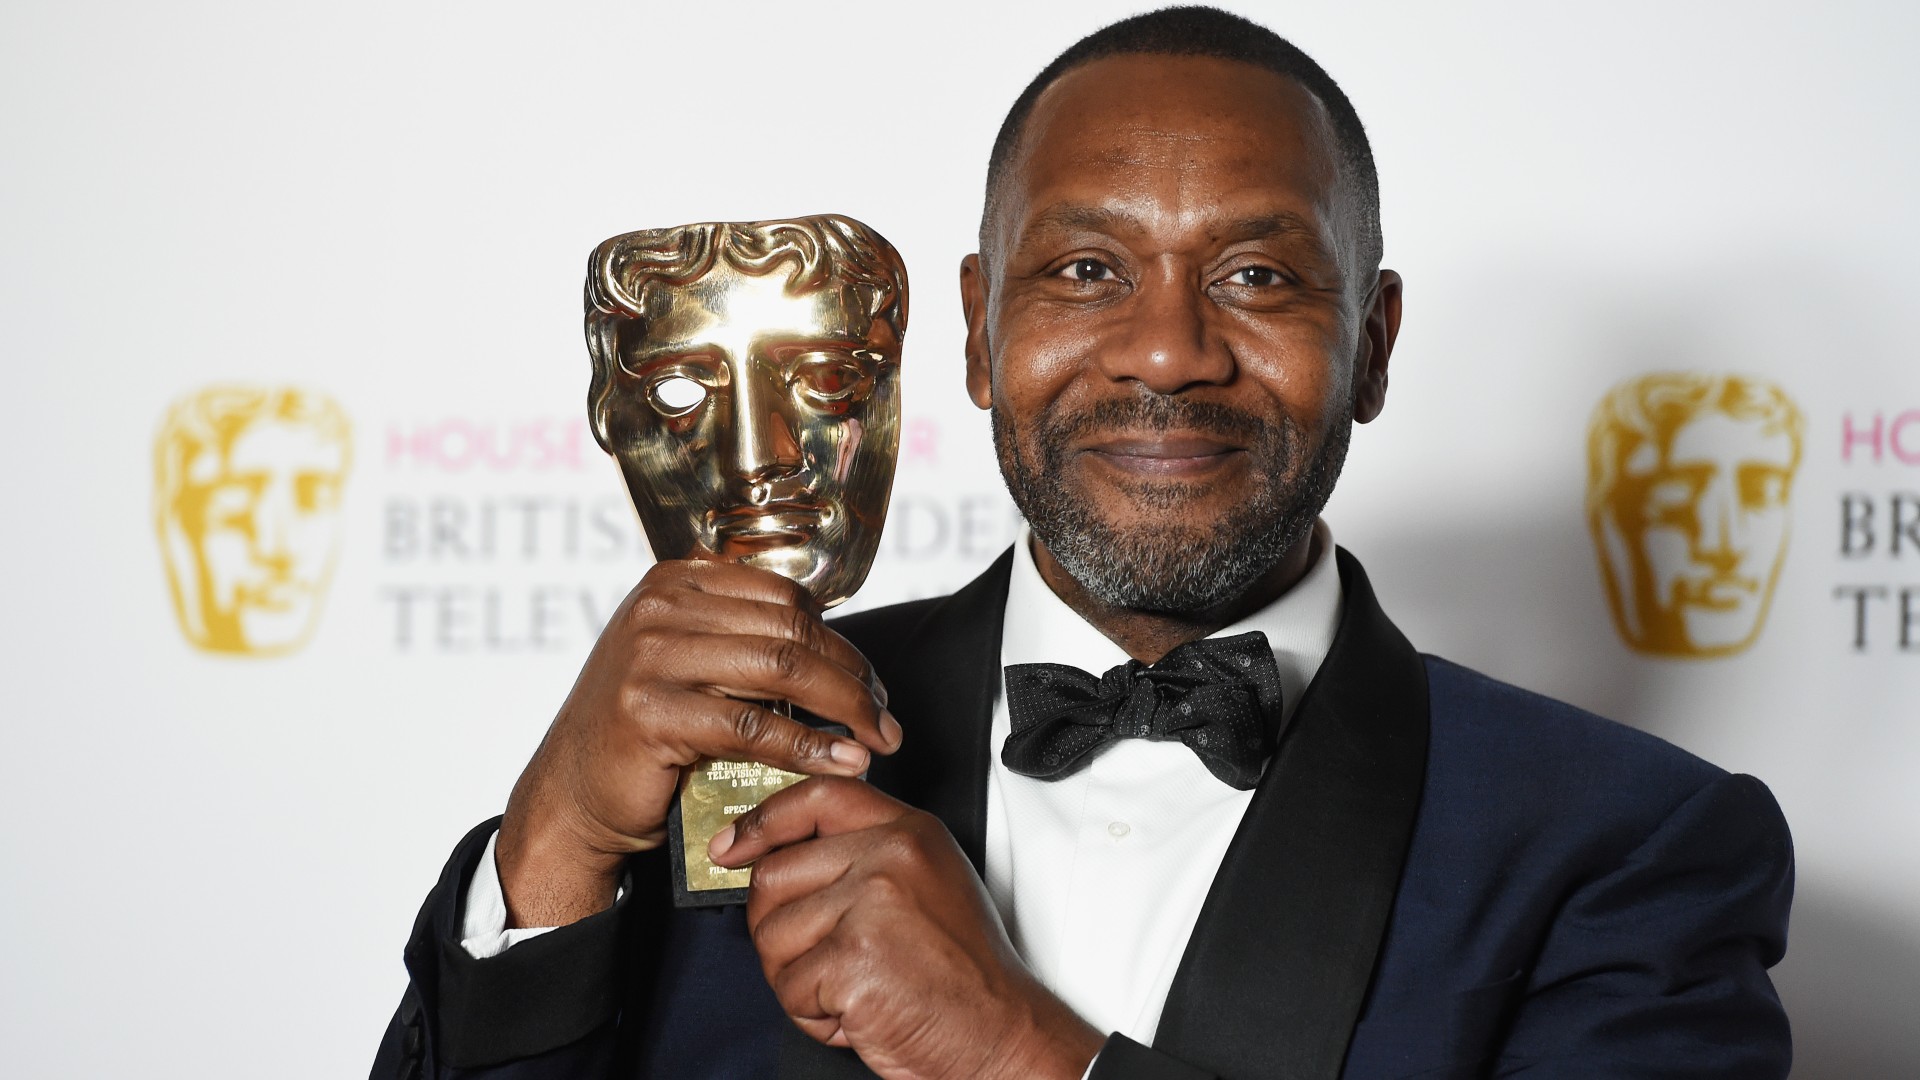 British Icon of the Week: Sir Lenny Henry, the Great Actor, Comedian, and Diversity Campaigner